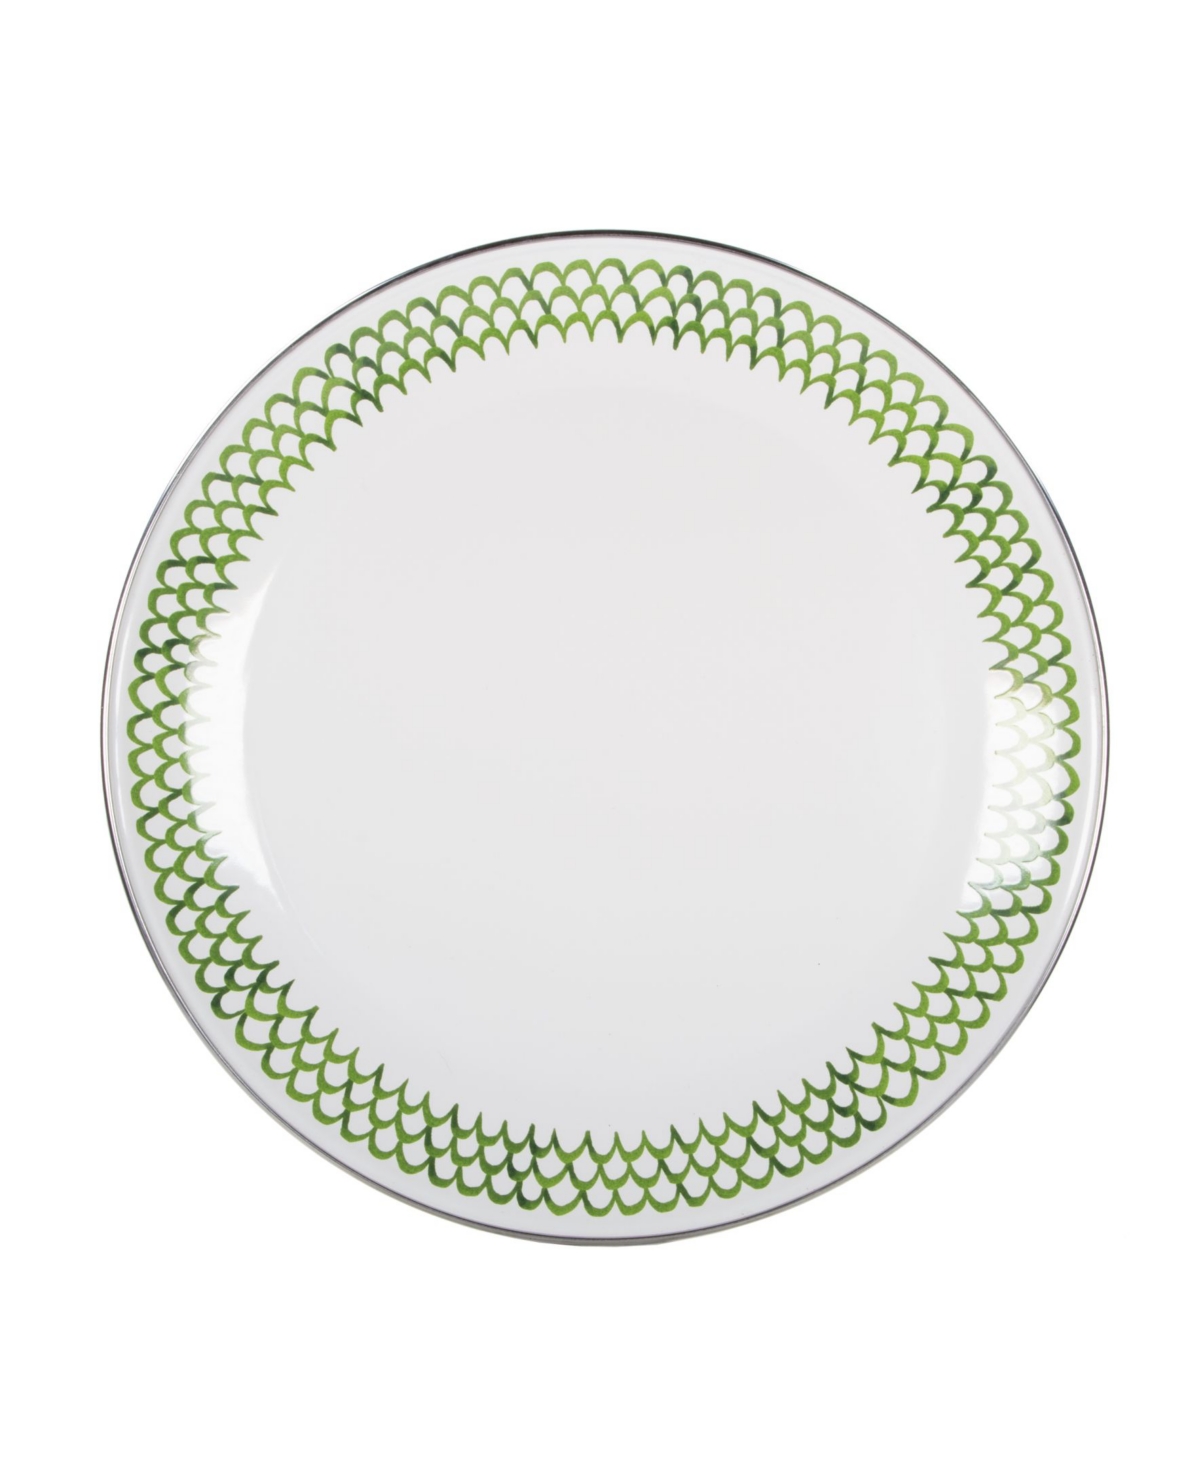 Scallop Enamelware Dinner Plates, Set of 4 - Green